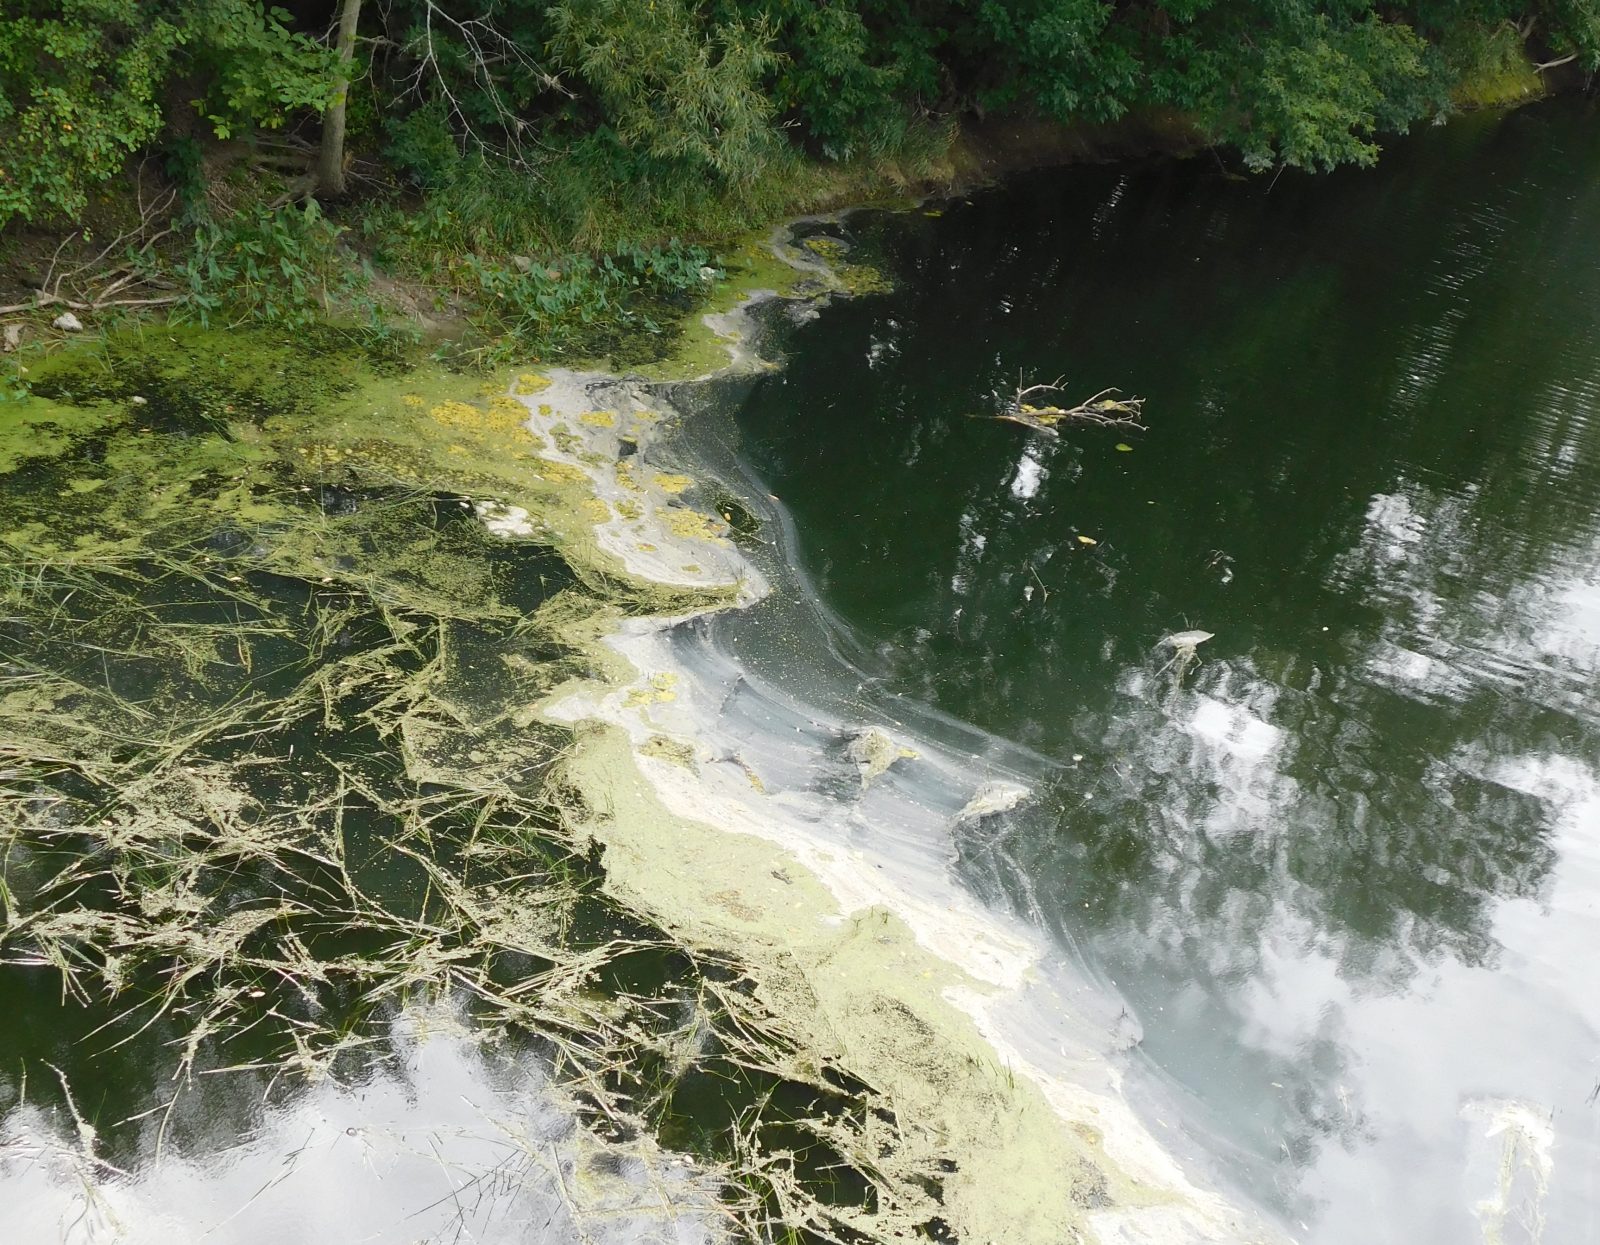 What’s in the Rigaud River?